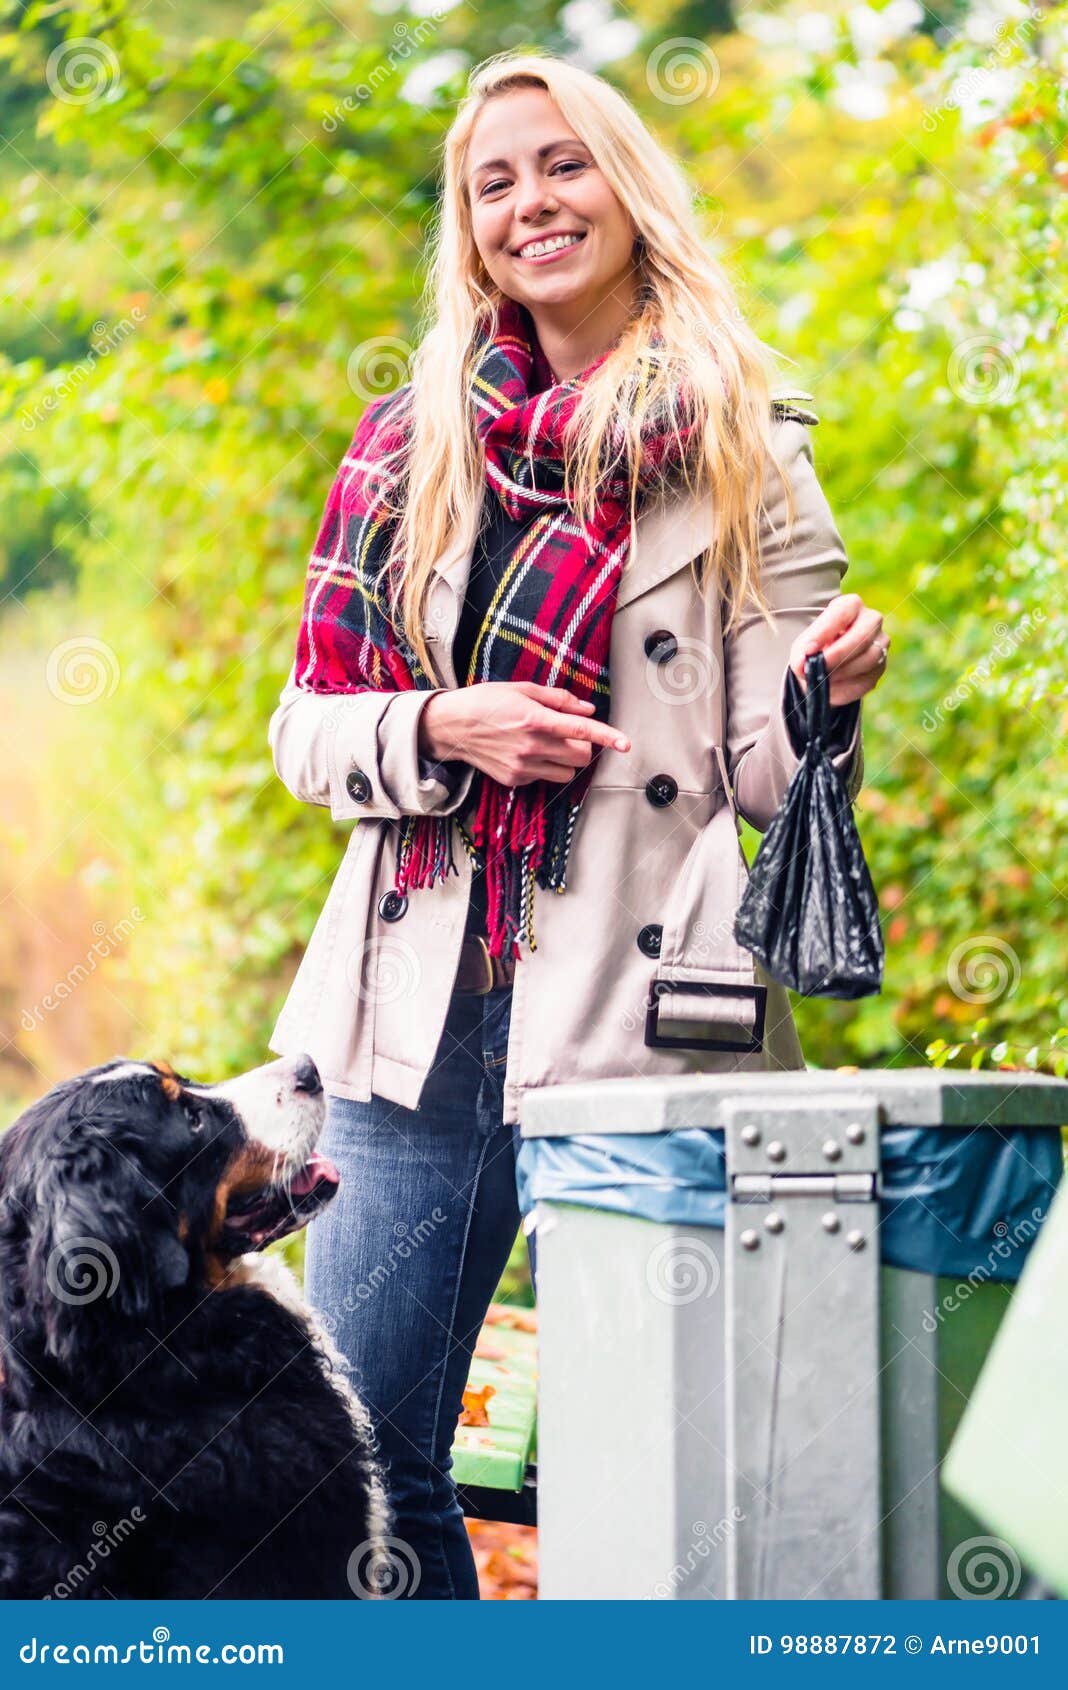 woman is picking up dog poo putting it in dustbin